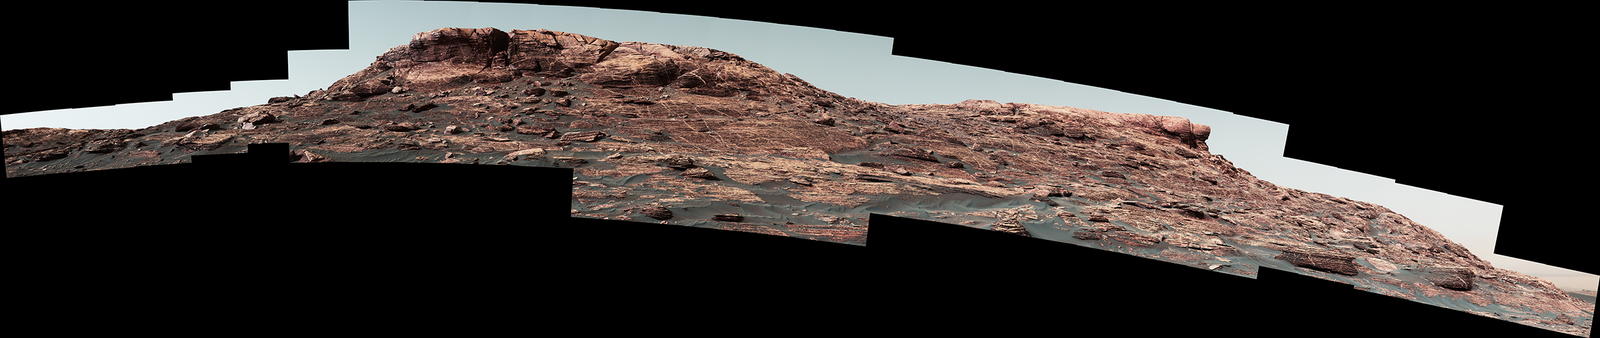 Researchers used the Mastcam on NASA's Curiosity Mars rover to gain this detailed view of layers in "Vera Rubin Ridge" from just below the ridge. The scene combines 70 images taken with the Mastcam's right-eye, telephoto-lens camera, on Aug. 13, 2017.